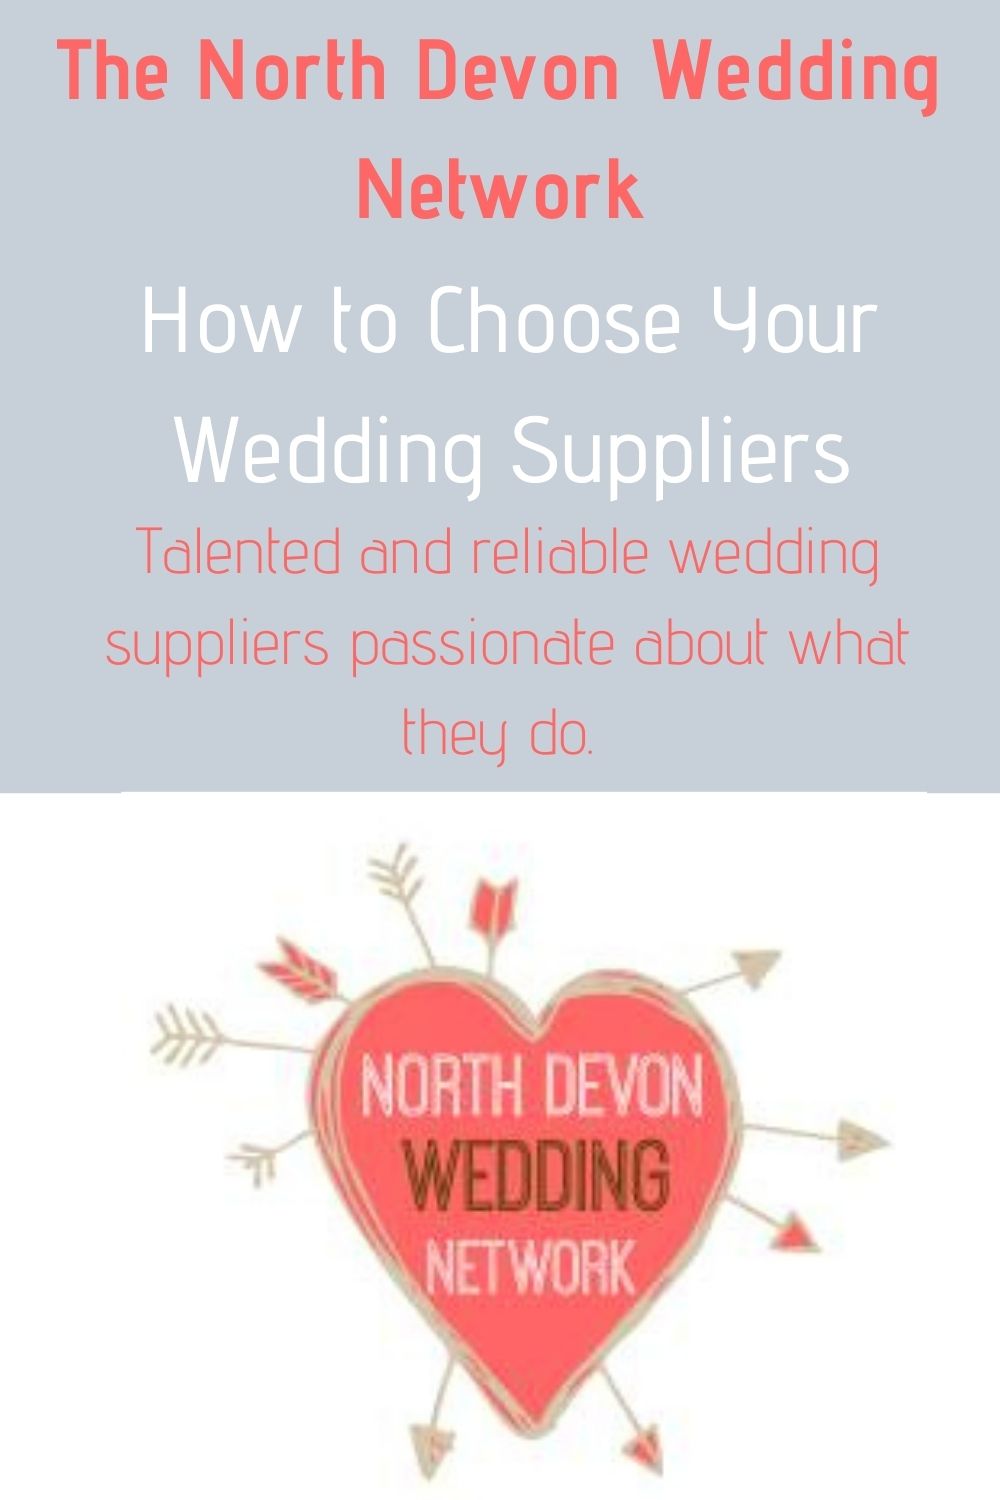 How to choose your wedding suppliers